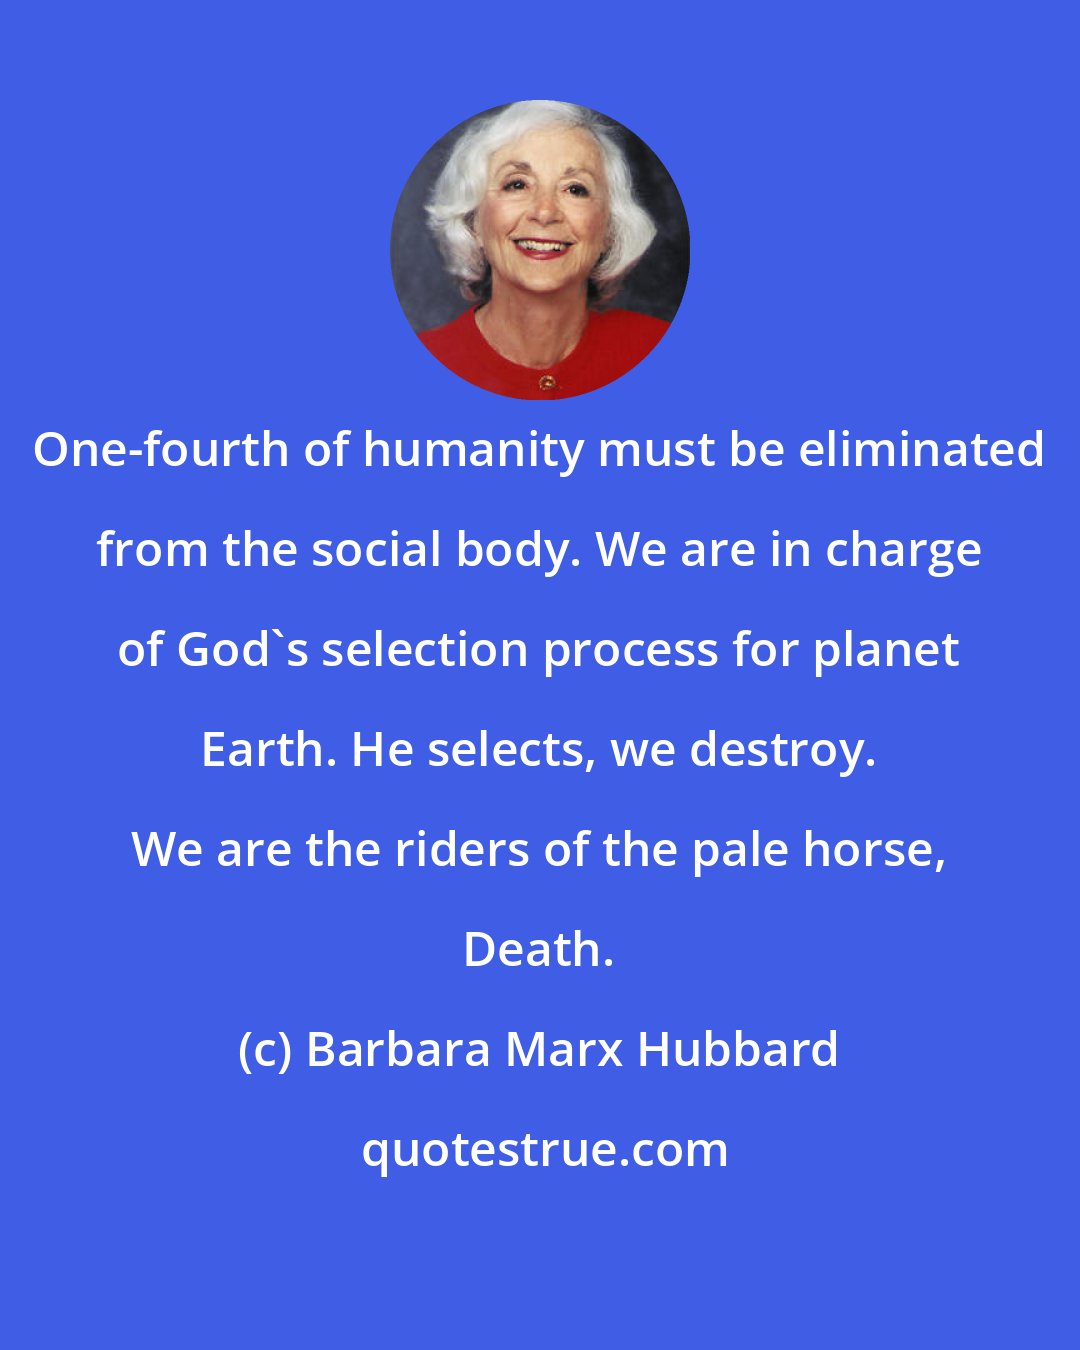 Barbara Marx Hubbard: One-fourth of humanity must be eliminated from the social body. We are in charge of God's selection process for planet Earth. He selects, we destroy. We are the riders of the pale horse, Death.